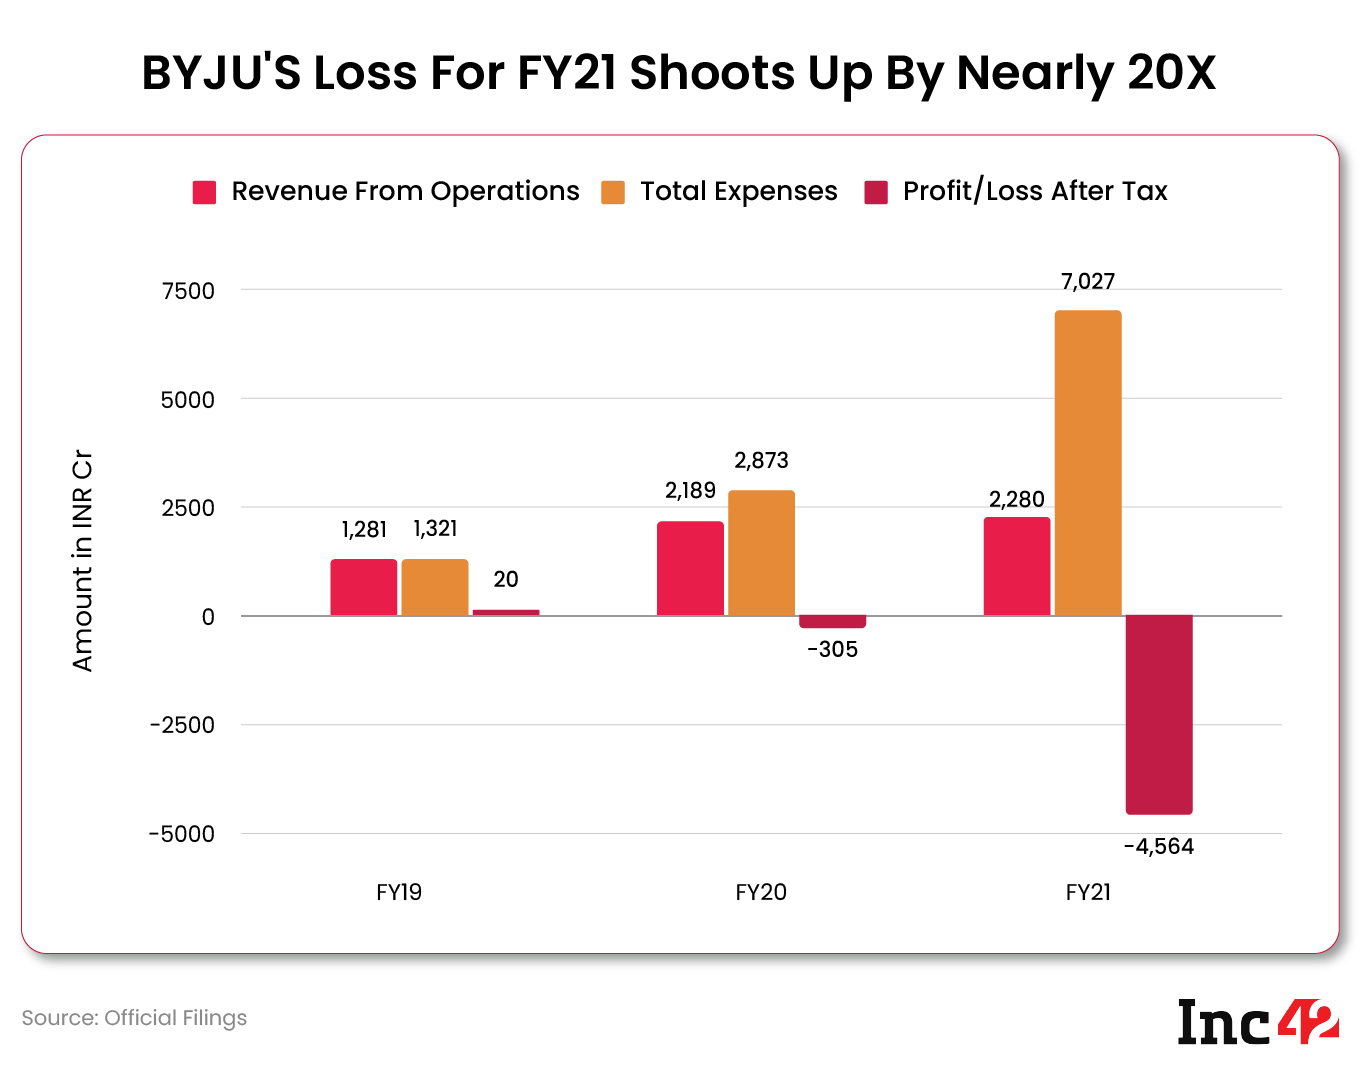 Byjus's loss for FY21 shoots up by nearly 20x